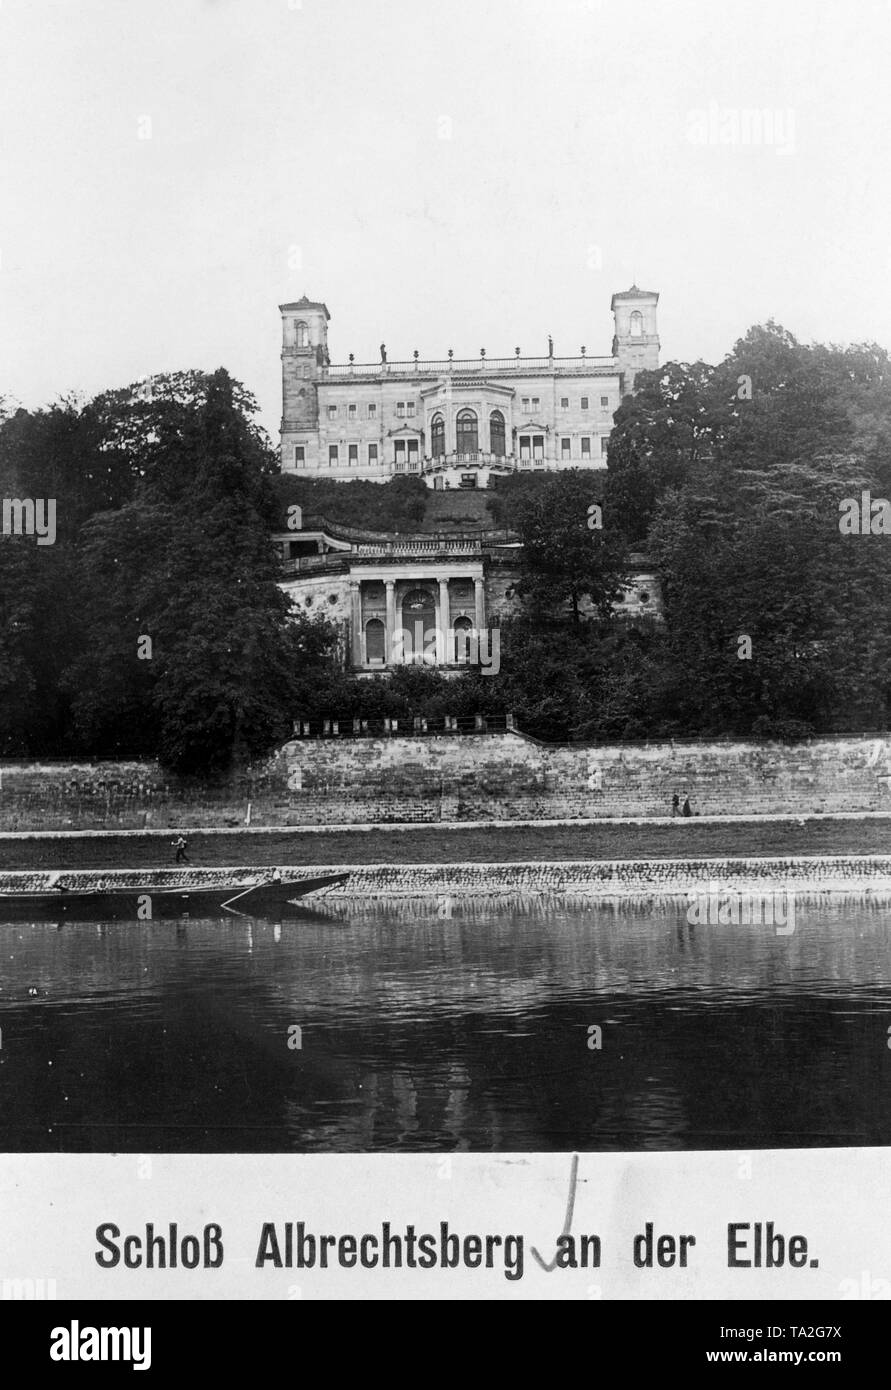 Front view of the Albrechtsberg  castle on the Elbe in Dresden, Saxony. Built in 1854, architect: Adolf Lohse. The picture is from 1912 Stock Photo